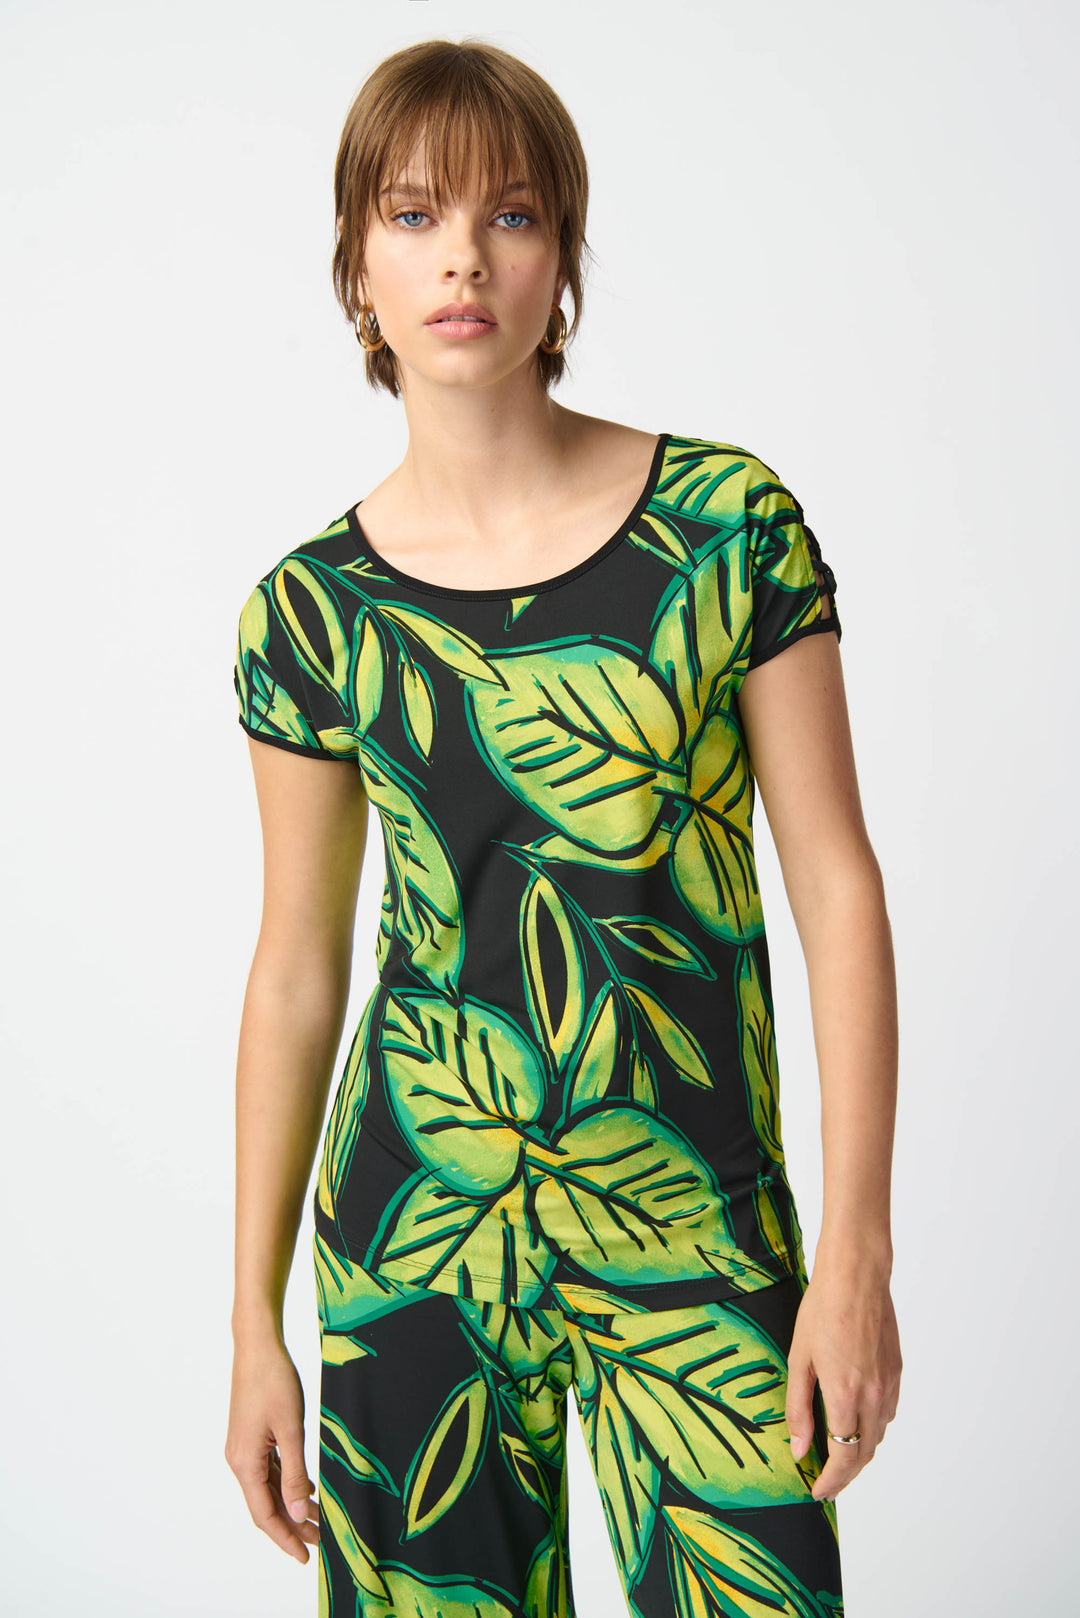 With a classic t-shirt style, it features unique qualities and a stunning leaf print that will dazzle wherever you go!